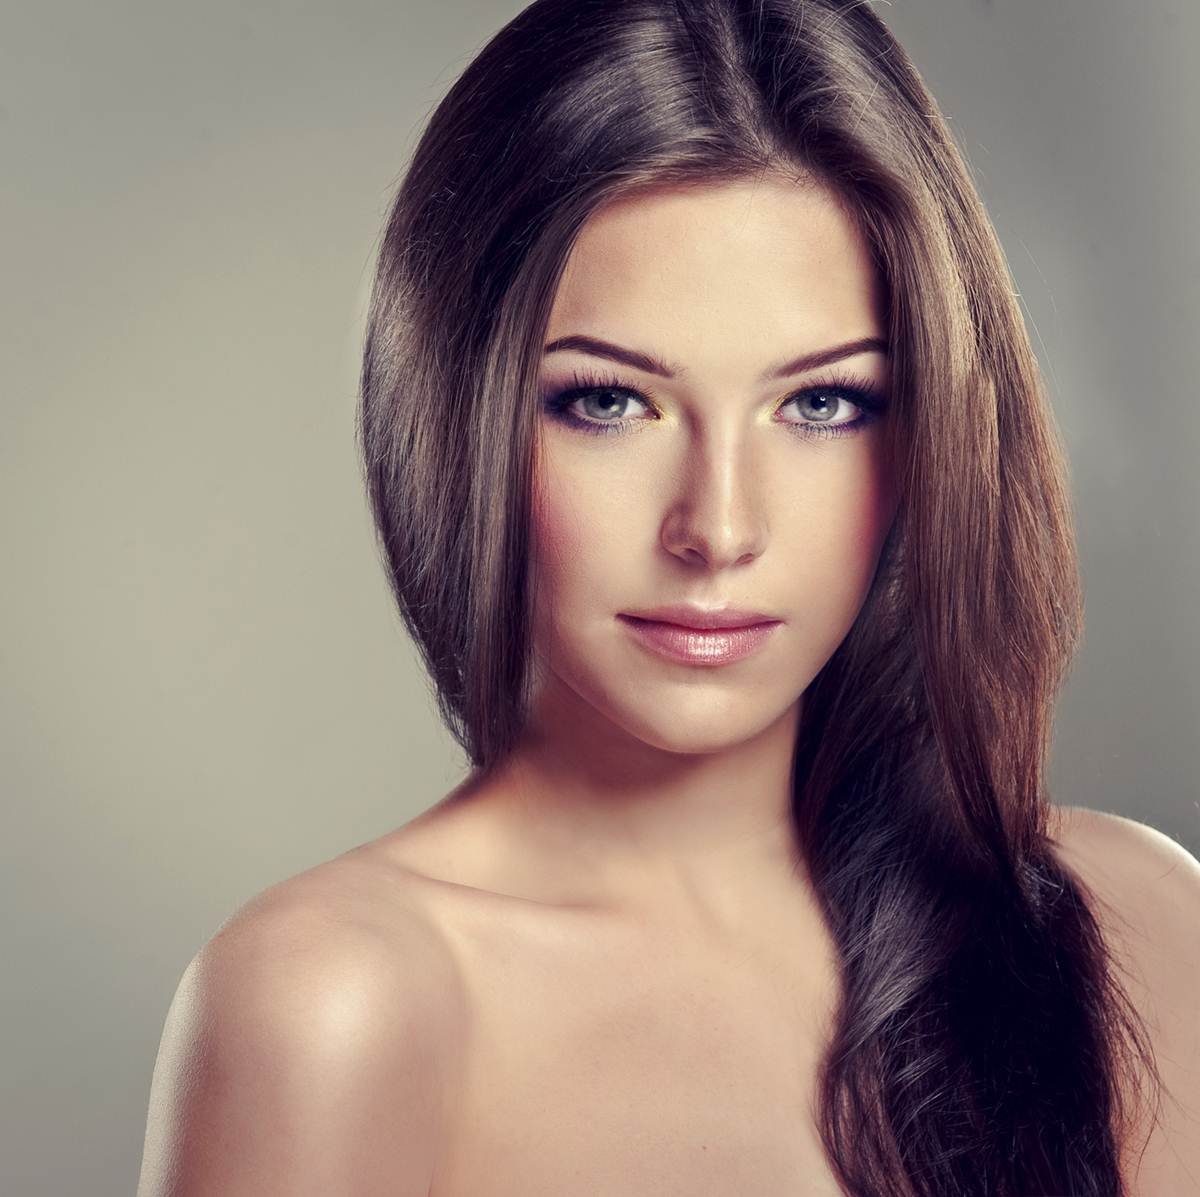 Girl with long straight hair.